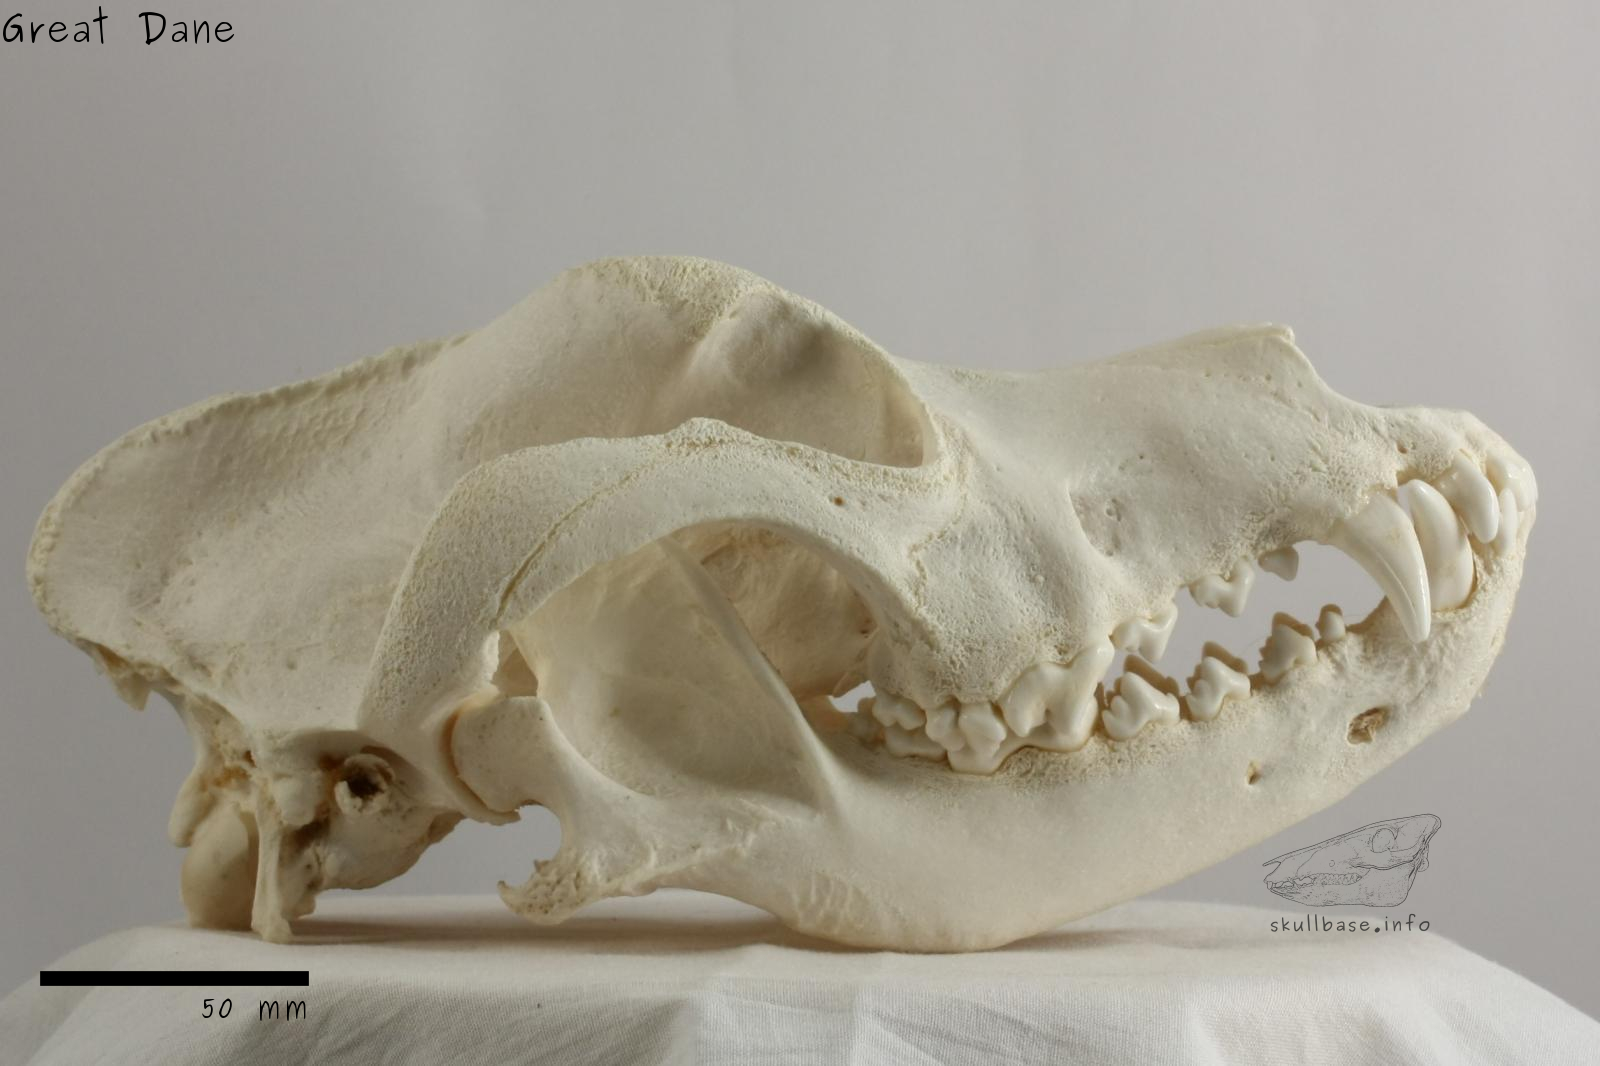 Great Dane (Canis lupus familiaris) skull lateral view